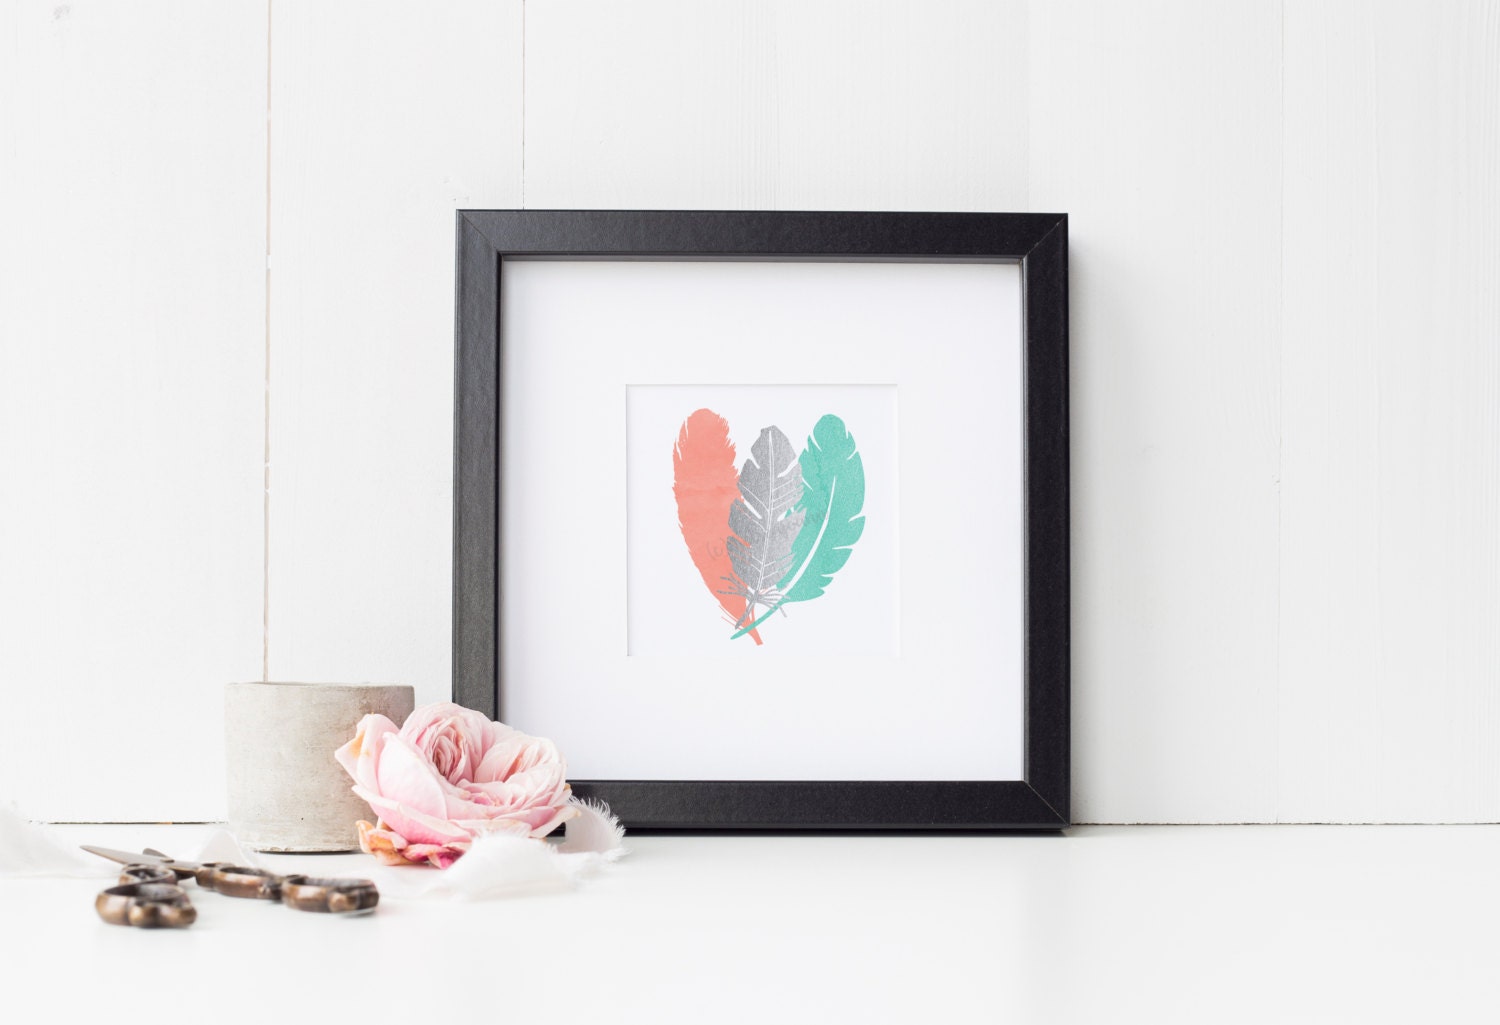 Silver Feather Decor Teal and Coral Aqua and Coral Decor Watercolor Art Minimalist Decor Peach Pastel Art Wedding Gift for her Office Decor